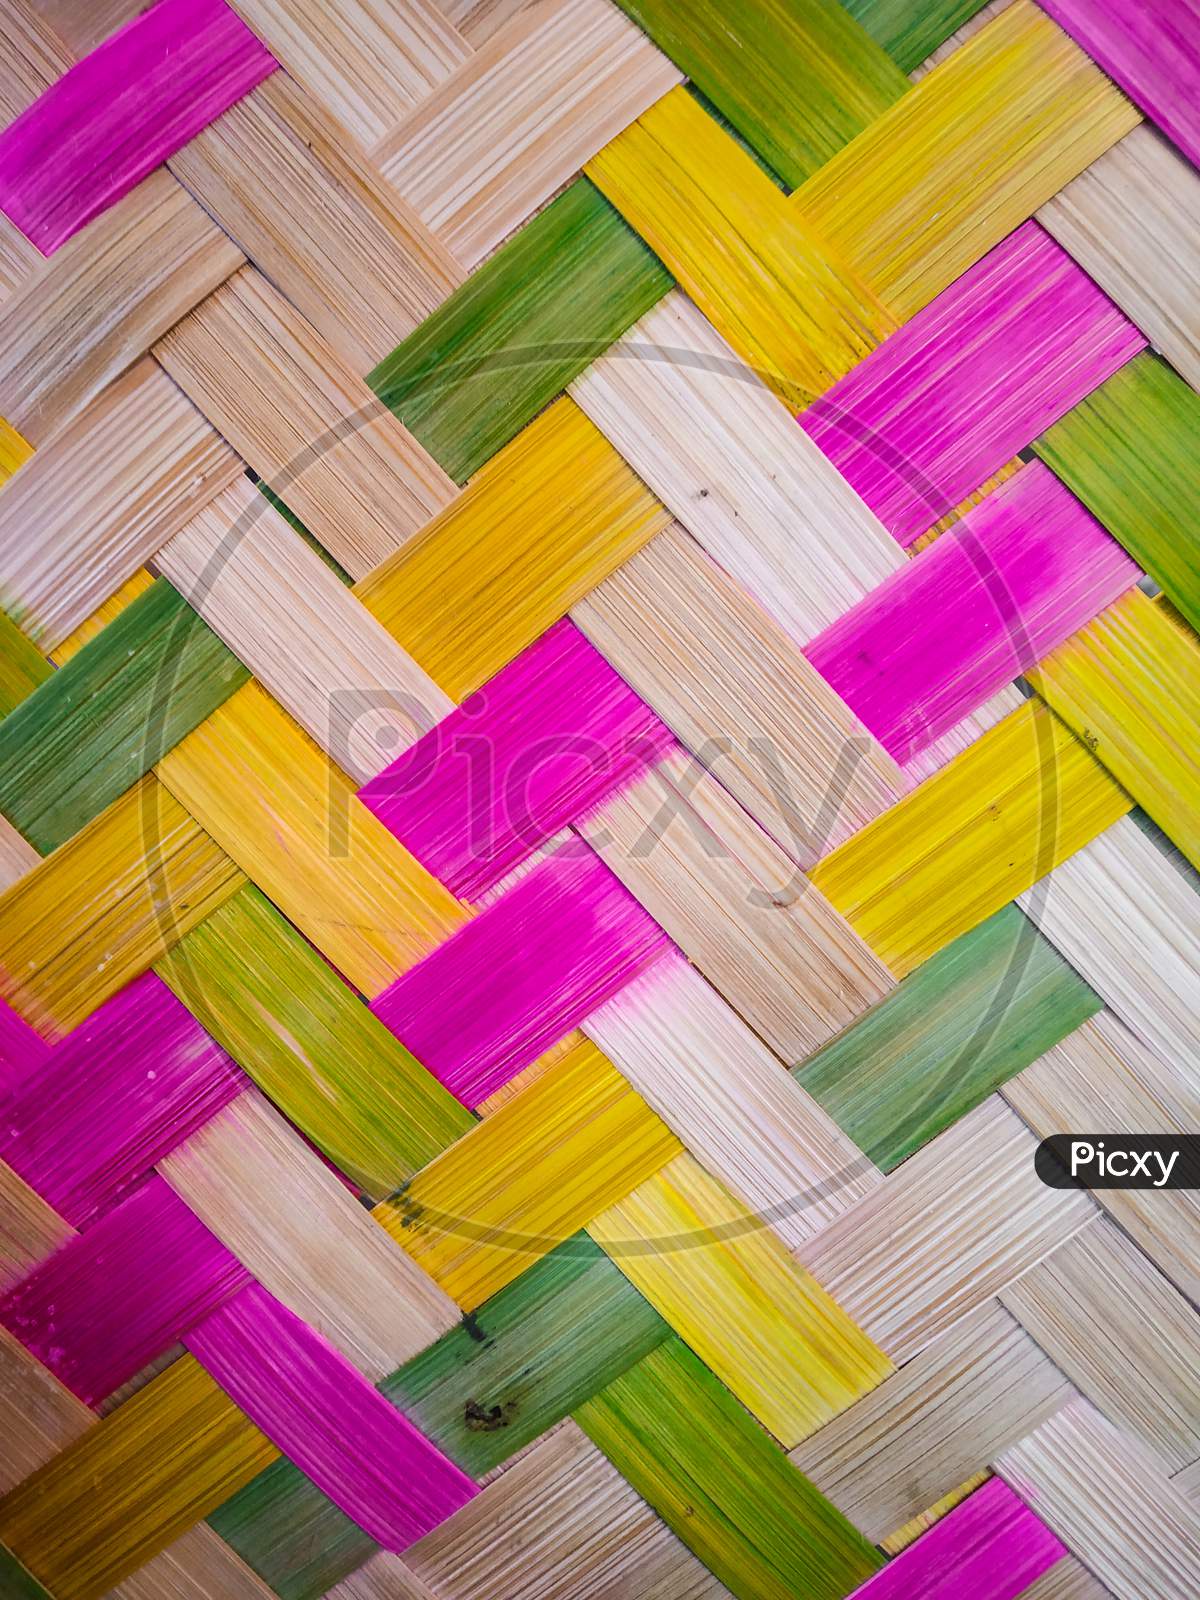 bamboo wall and bamboo mat texture background wallpaper , yellow ,green , brown and pink color bamboo texture background.